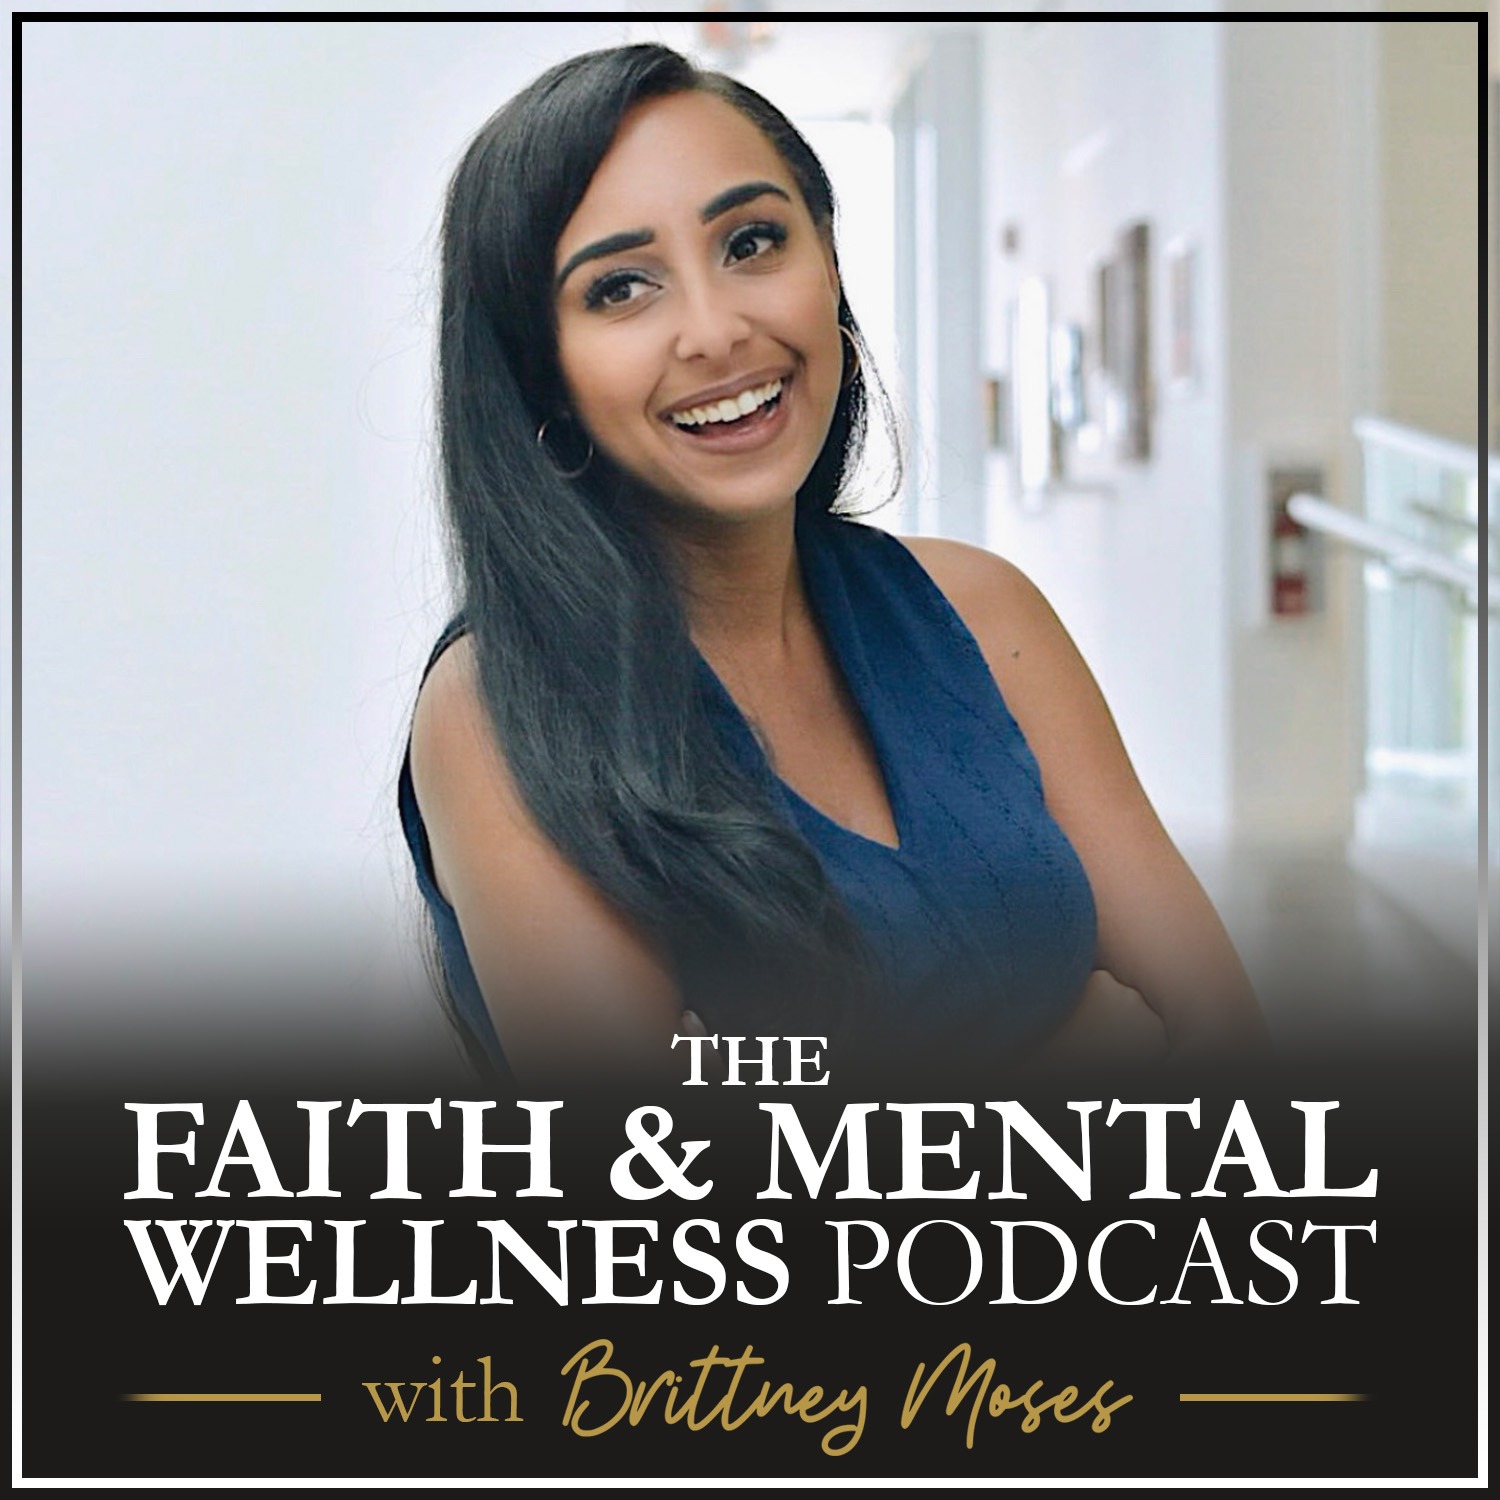 066: How We Walk Through Shifts in our Faith Perspectives with Shauna Niequist